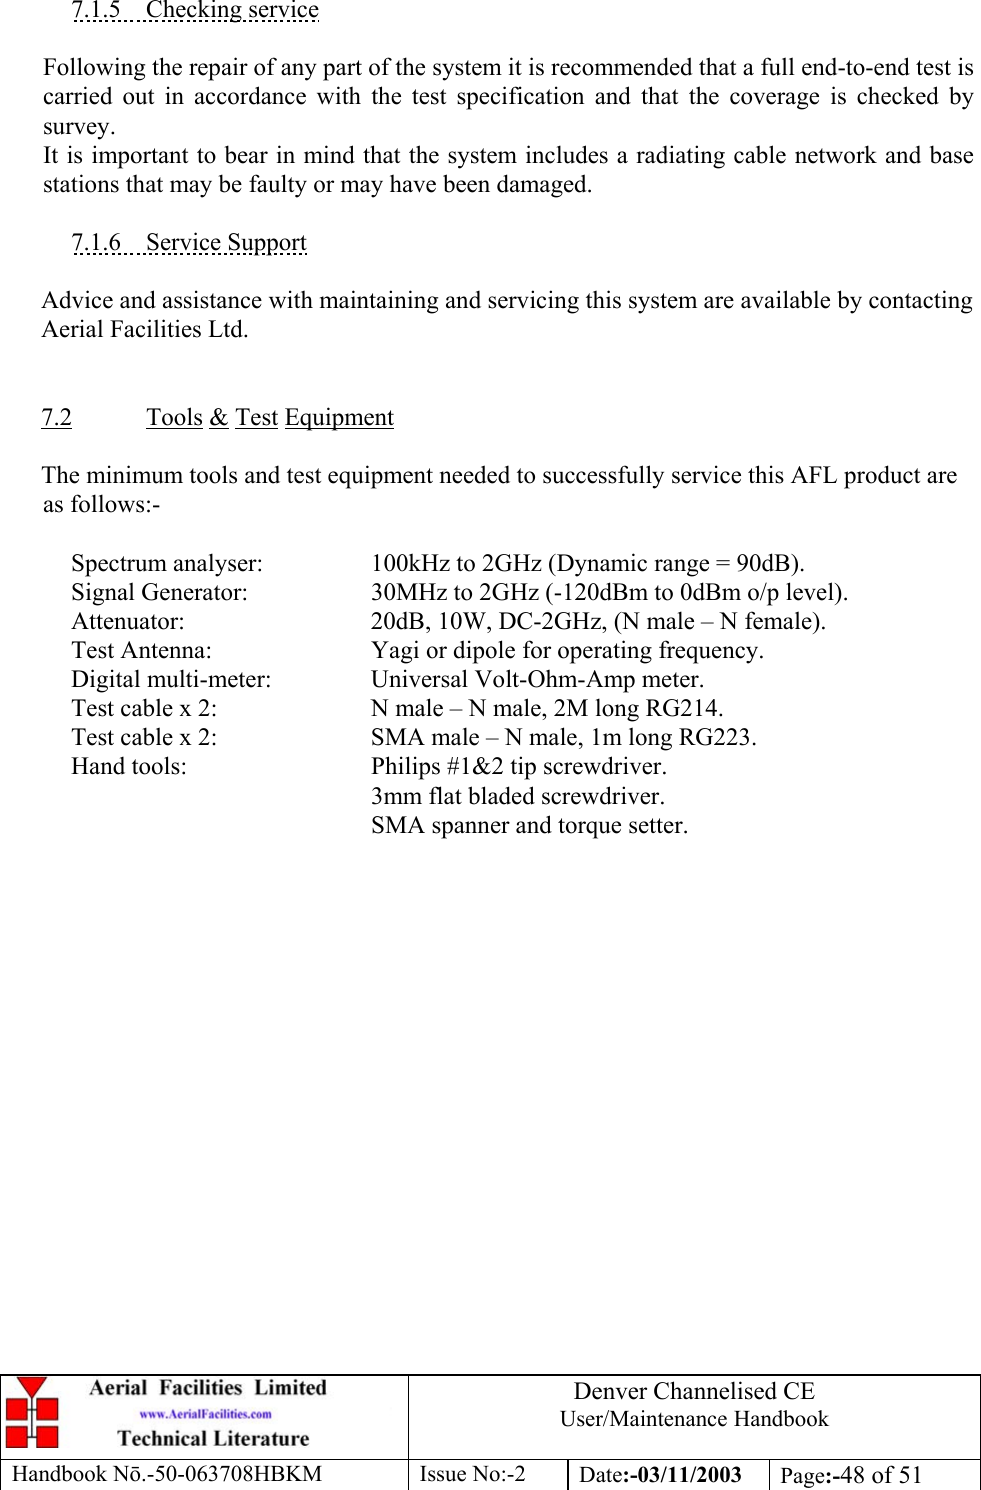 Denver Channelised CEUser/Maintenance HandbookHandbook Nō.-50-063708HBKM Issue No:-2 Date:-03/11/2003 Page:-48 of 517.1.5    Checking serviceFollowing the repair of any part of the system it is recommended that a full end-to-end test iscarried out in accordance with the test specification and that the coverage is checked bysurvey.It is important to bear in mind that the system includes a radiating cable network and basestations that may be faulty or may have been damaged.7.1.6    Service SupportAdvice and assistance with maintaining and servicing this system are available by contactingAerial Facilities Ltd.7.2 Tools &amp; Test EquipmentThe minimum tools and test equipment needed to successfully service this AFL product areas follows:-Spectrum analyser: 100kHz to 2GHz (Dynamic range = 90dB).Signal Generator: 30MHz to 2GHz (-120dBm to 0dBm o/p level).Attenuator: 20dB, 10W, DC-2GHz, (N male – N female).Test Antenna: Yagi or dipole for operating frequency.Digital multi-meter: Universal Volt-Ohm-Amp meter.Test cable x 2: N male – N male, 2M long RG214.Test cable x 2: SMA male – N male, 1m long RG223.Hand tools: Philips #1&amp;2 tip screwdriver.3mm flat bladed screwdriver.SMA spanner and torque setter.